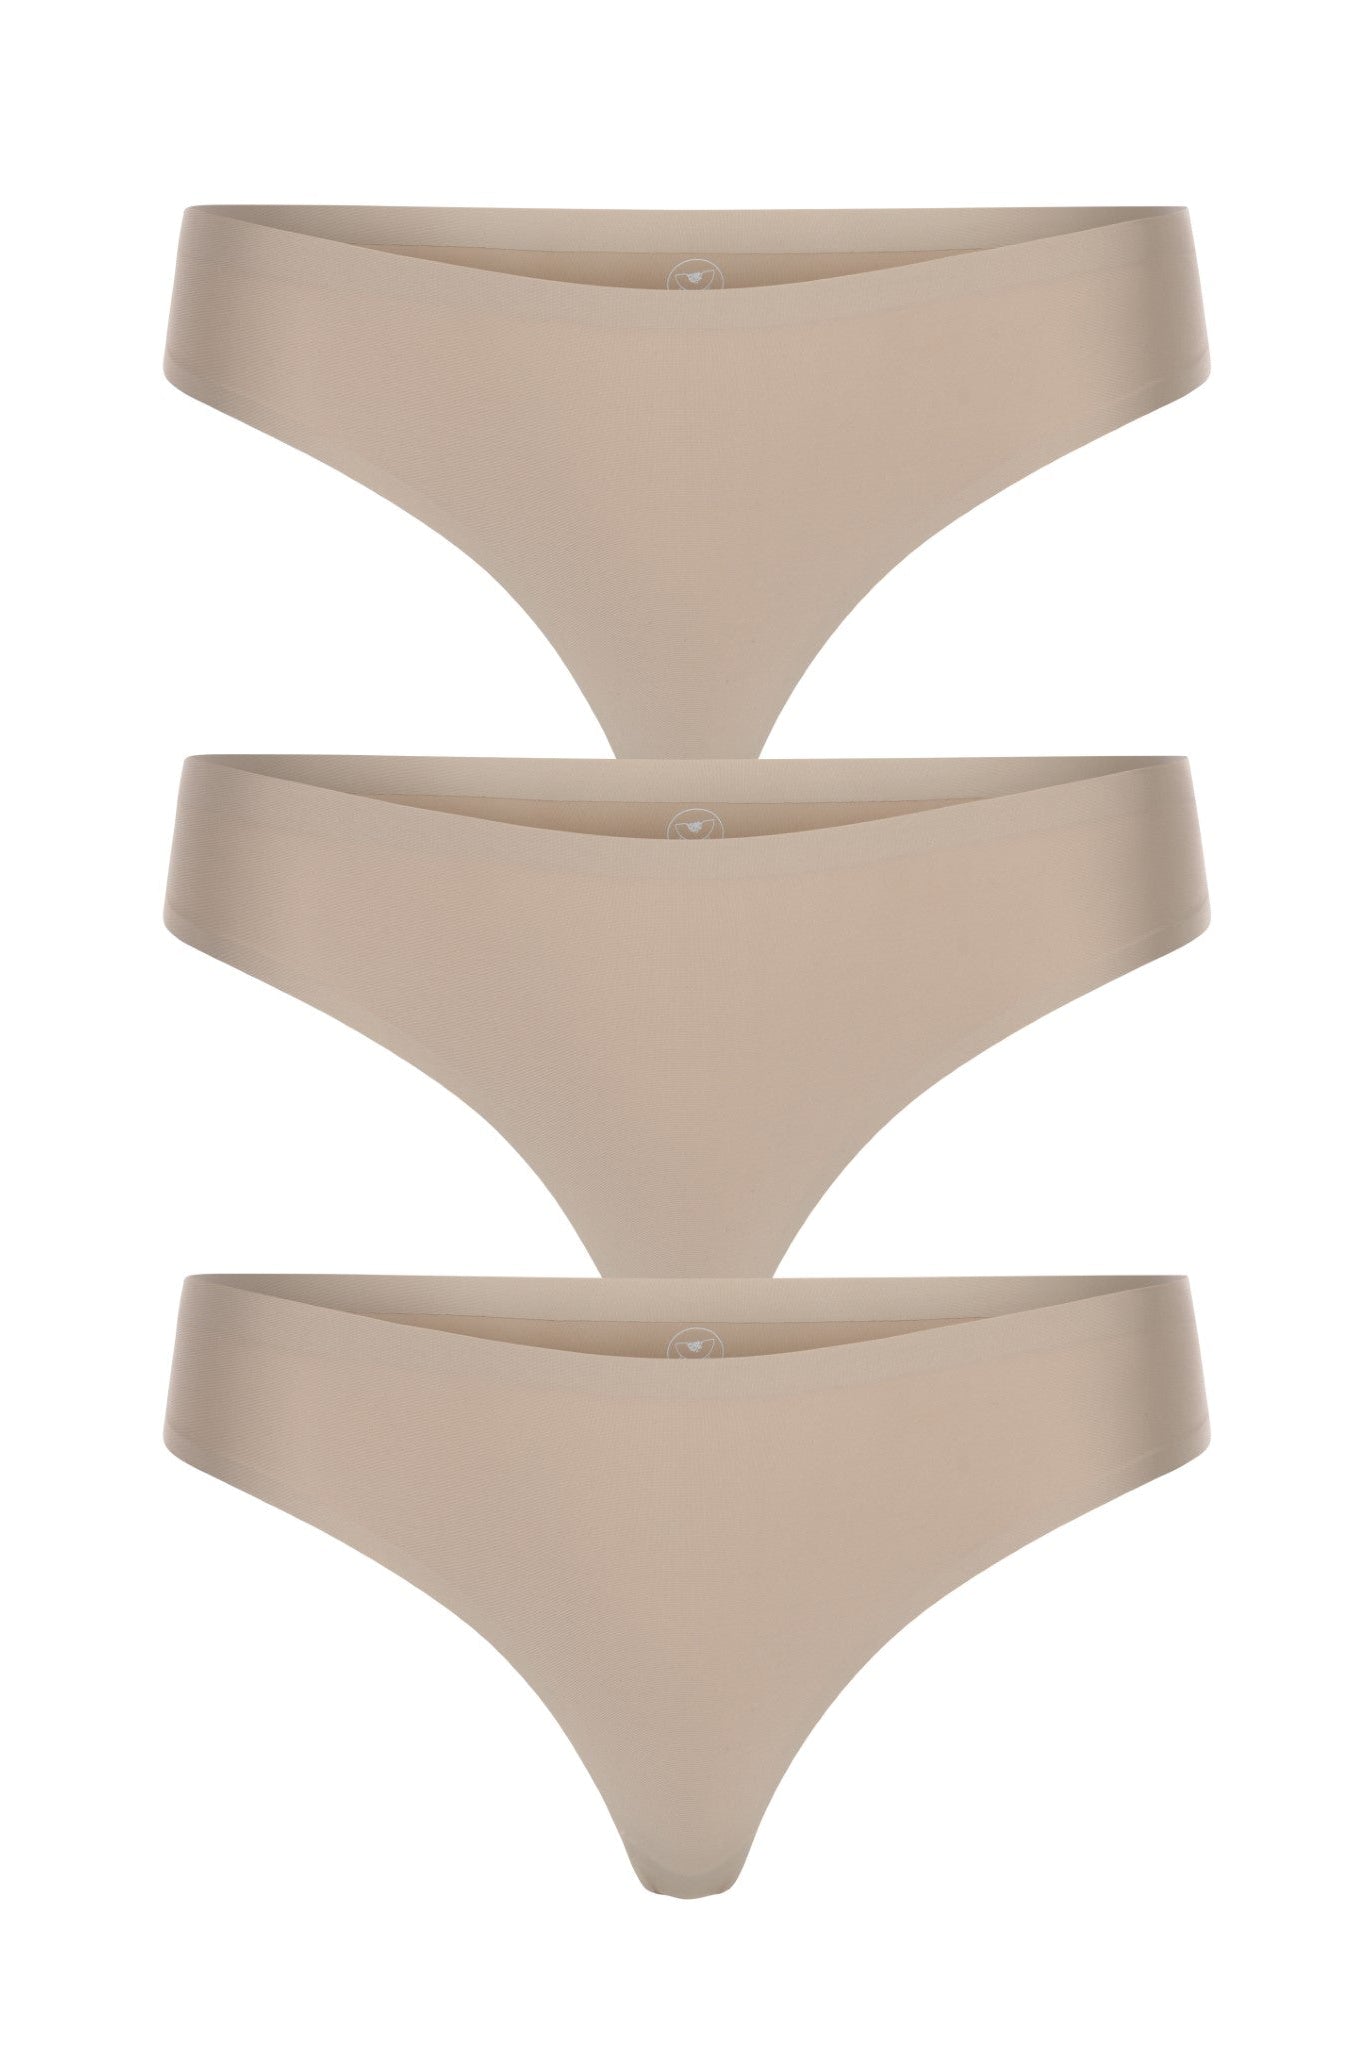 Skinz Thong 3-Pack - Panty - Nude Nude